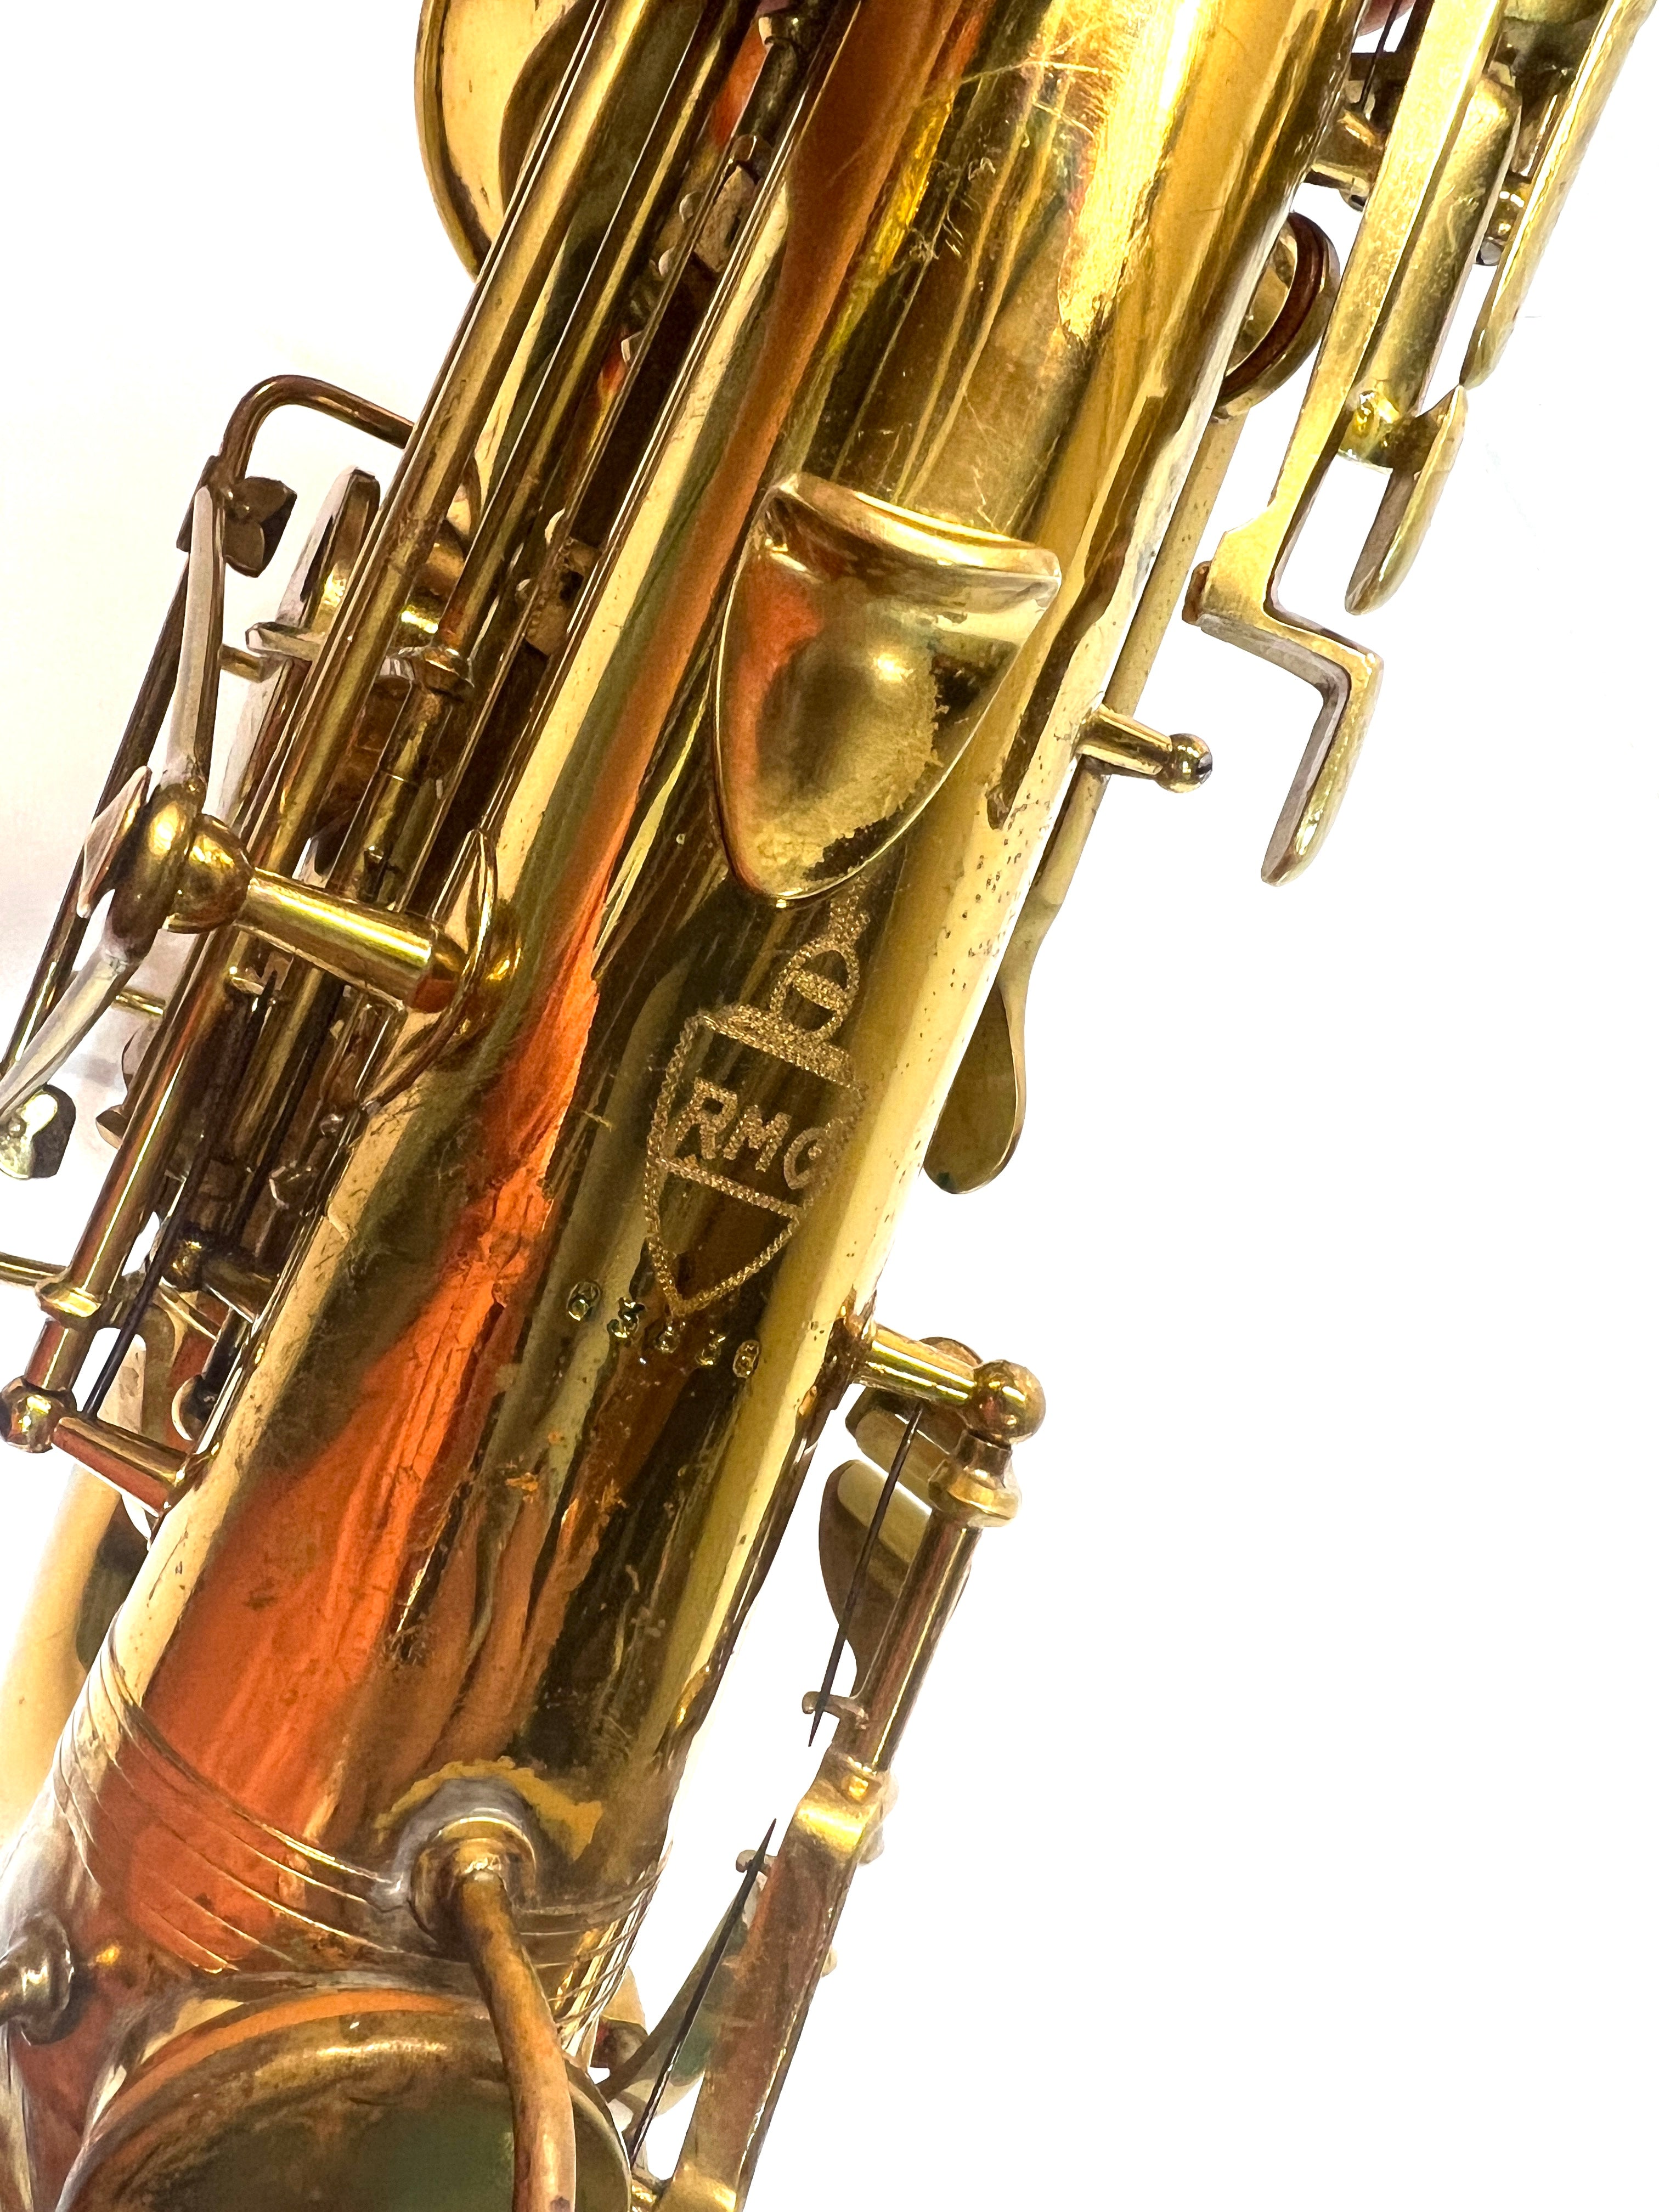 The Martin Alto Saxophone Elkhart Indiana Plays Well Recently Serviced USED